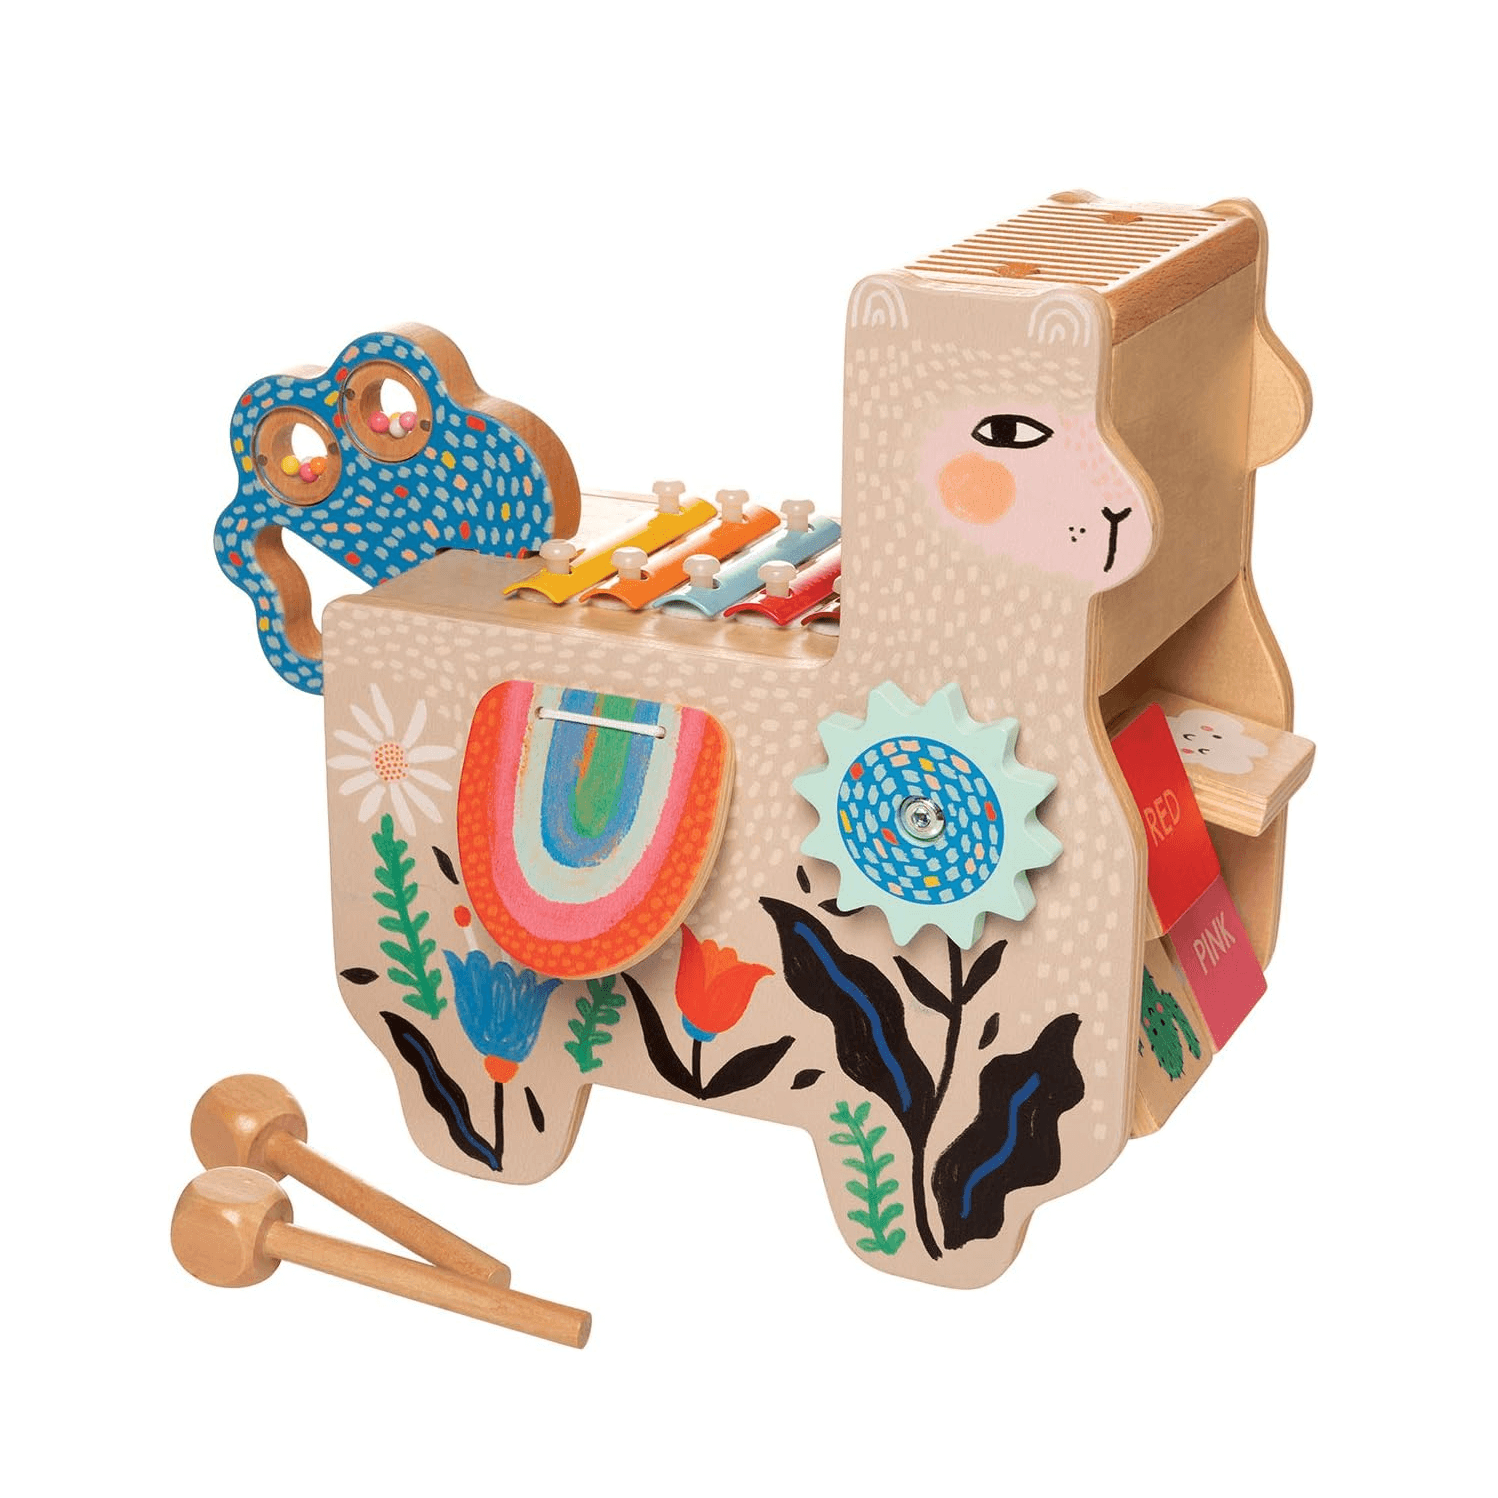 Montessori Manhattan Toy Musical Llama Wooden Instrument With Drums and Percussion